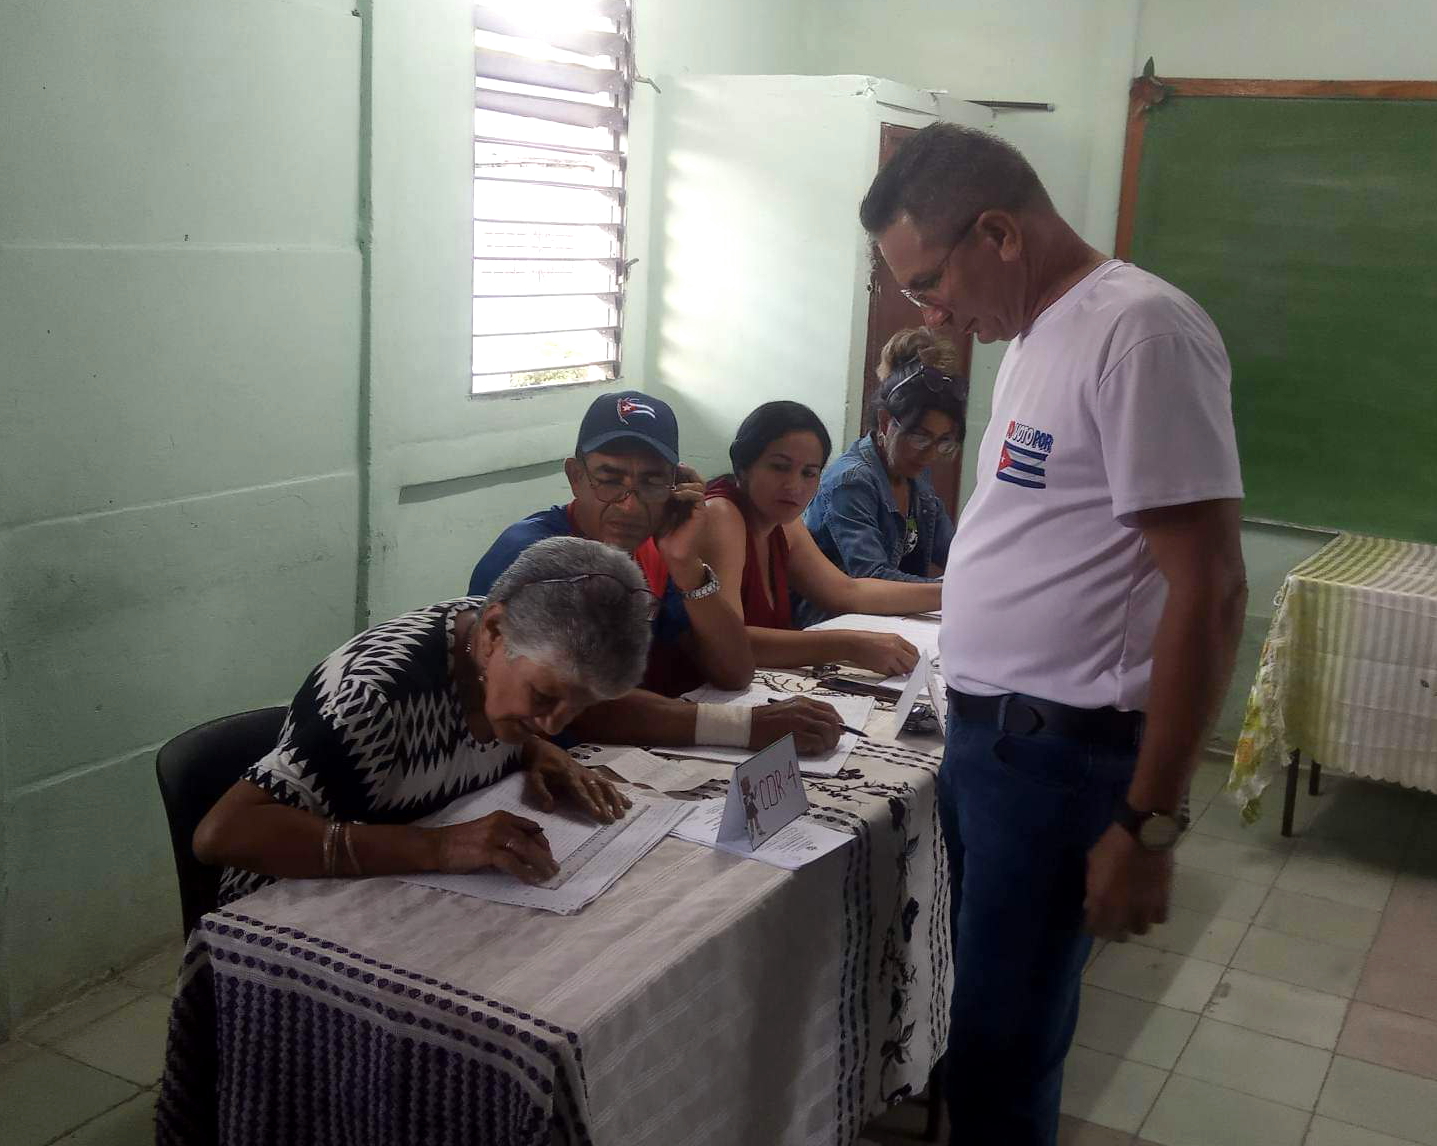 Puerto Padre's voters go to the polls.